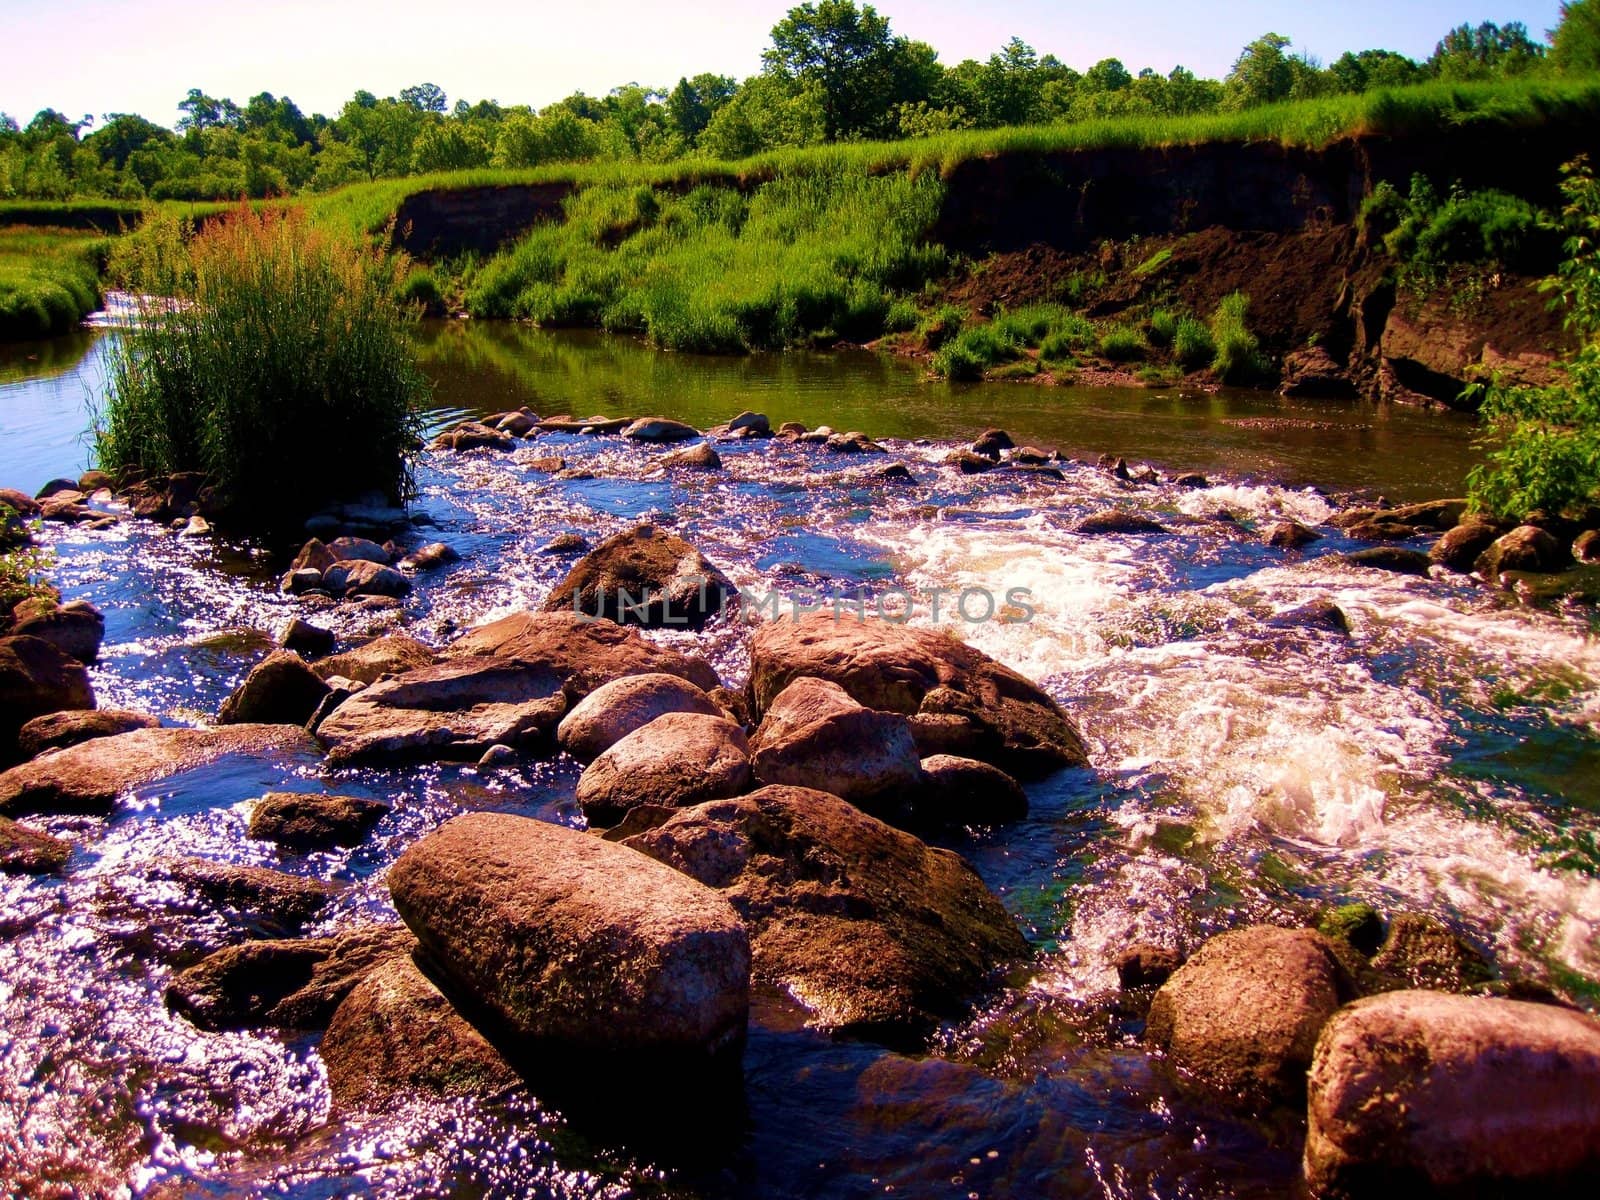 A small rocky river containing small rapids before a waterfall.